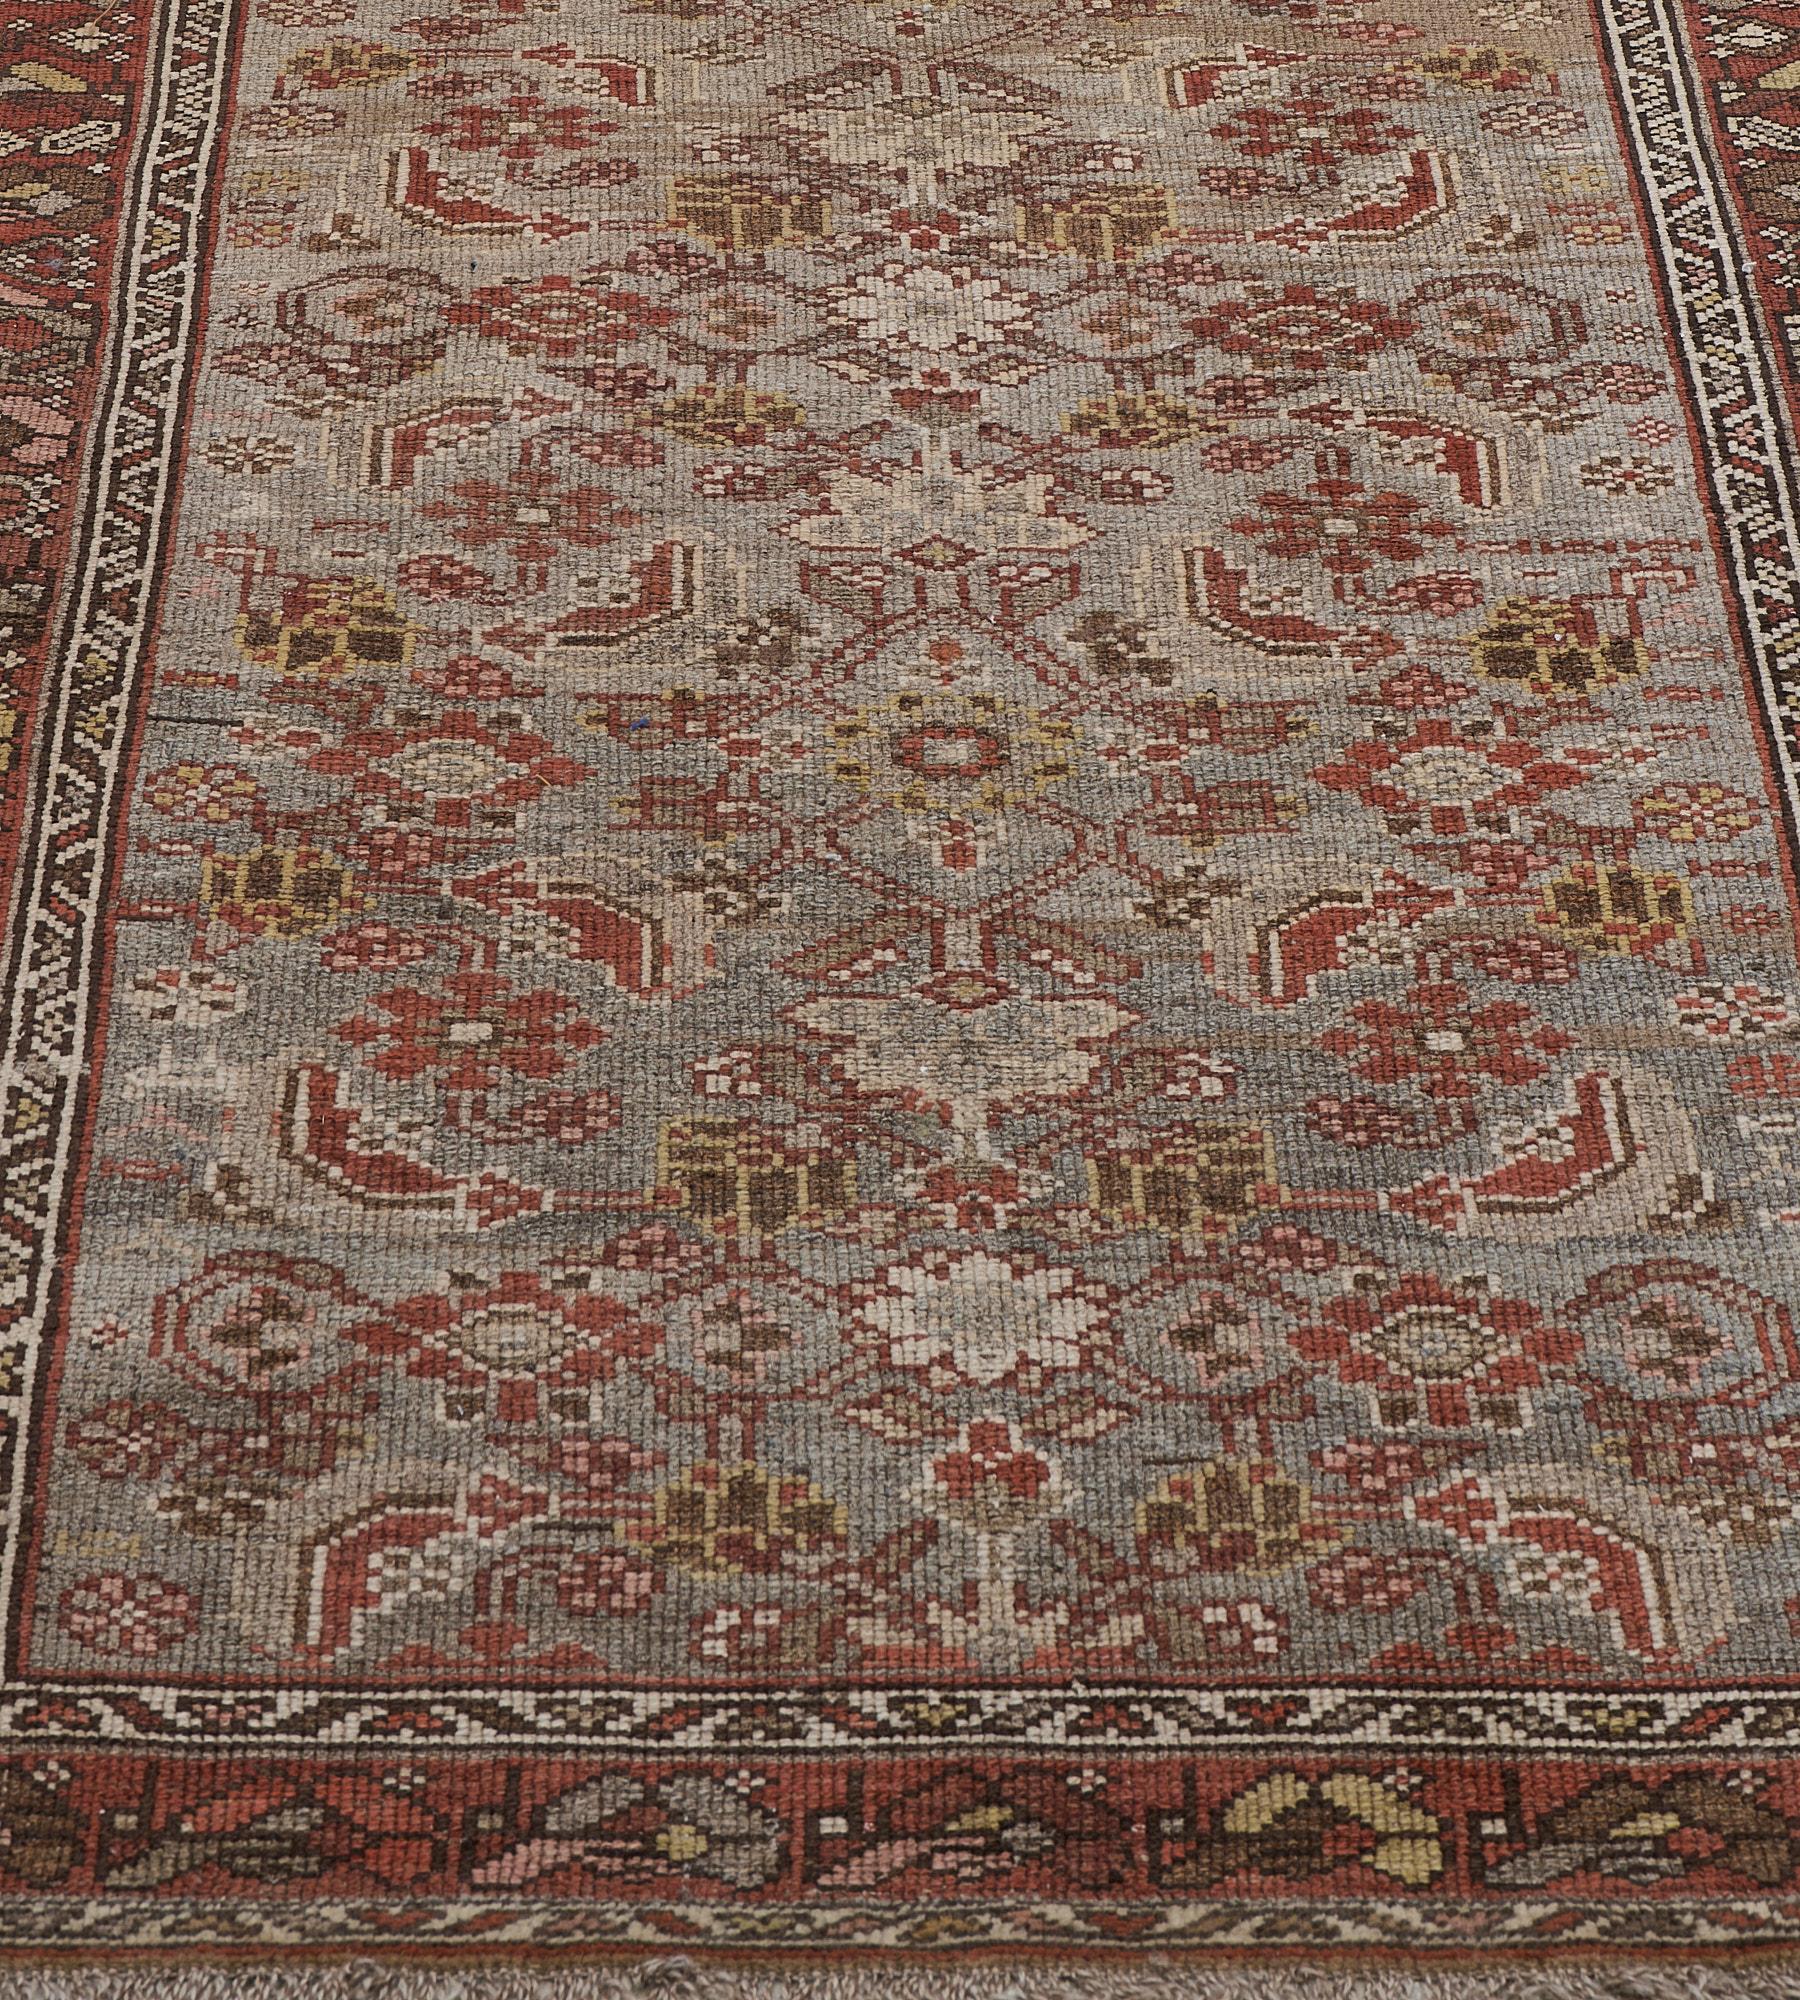 This antique Persian Malayer rug has a shaded steel-blue field with an overall fox-red, sandy-yellow, ivory and shaded pink herati-pattern, in a fox-red border of polychrome linked floral motifs between ivory ribbon floral vine stripes.